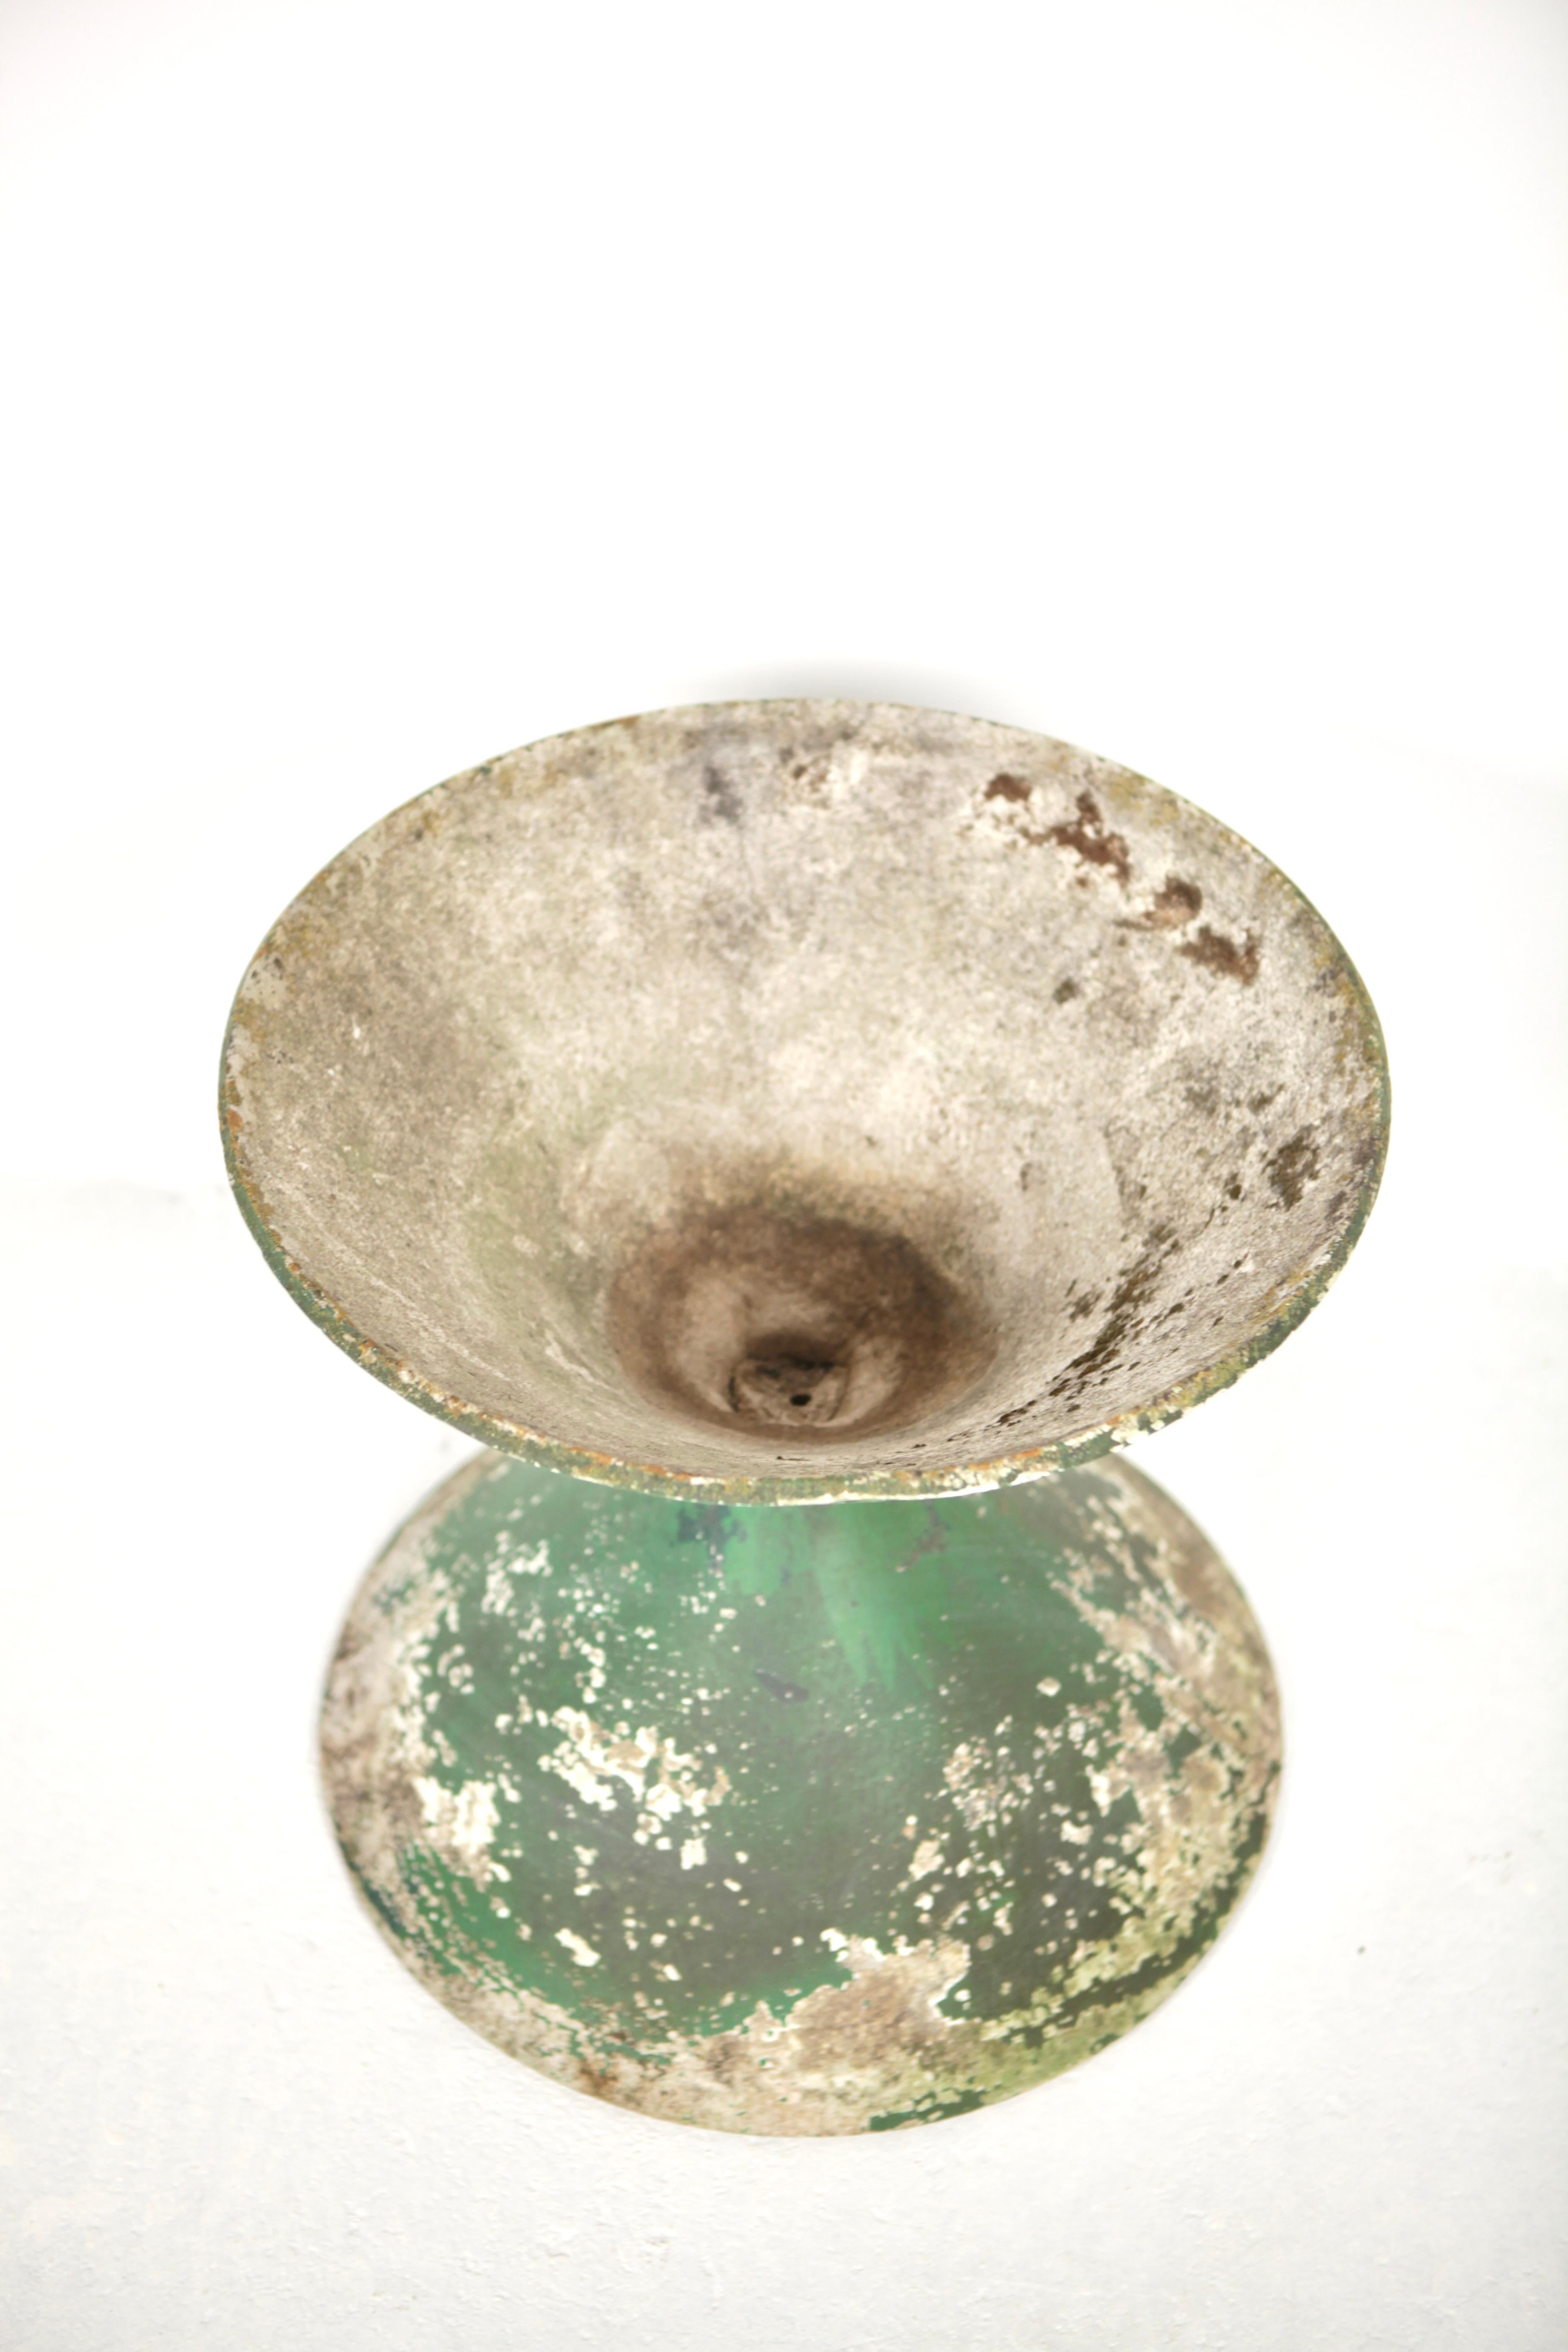 Swiss Willy Guhl, Concrete Spindle Planter, Eternit, 1960s For Sale